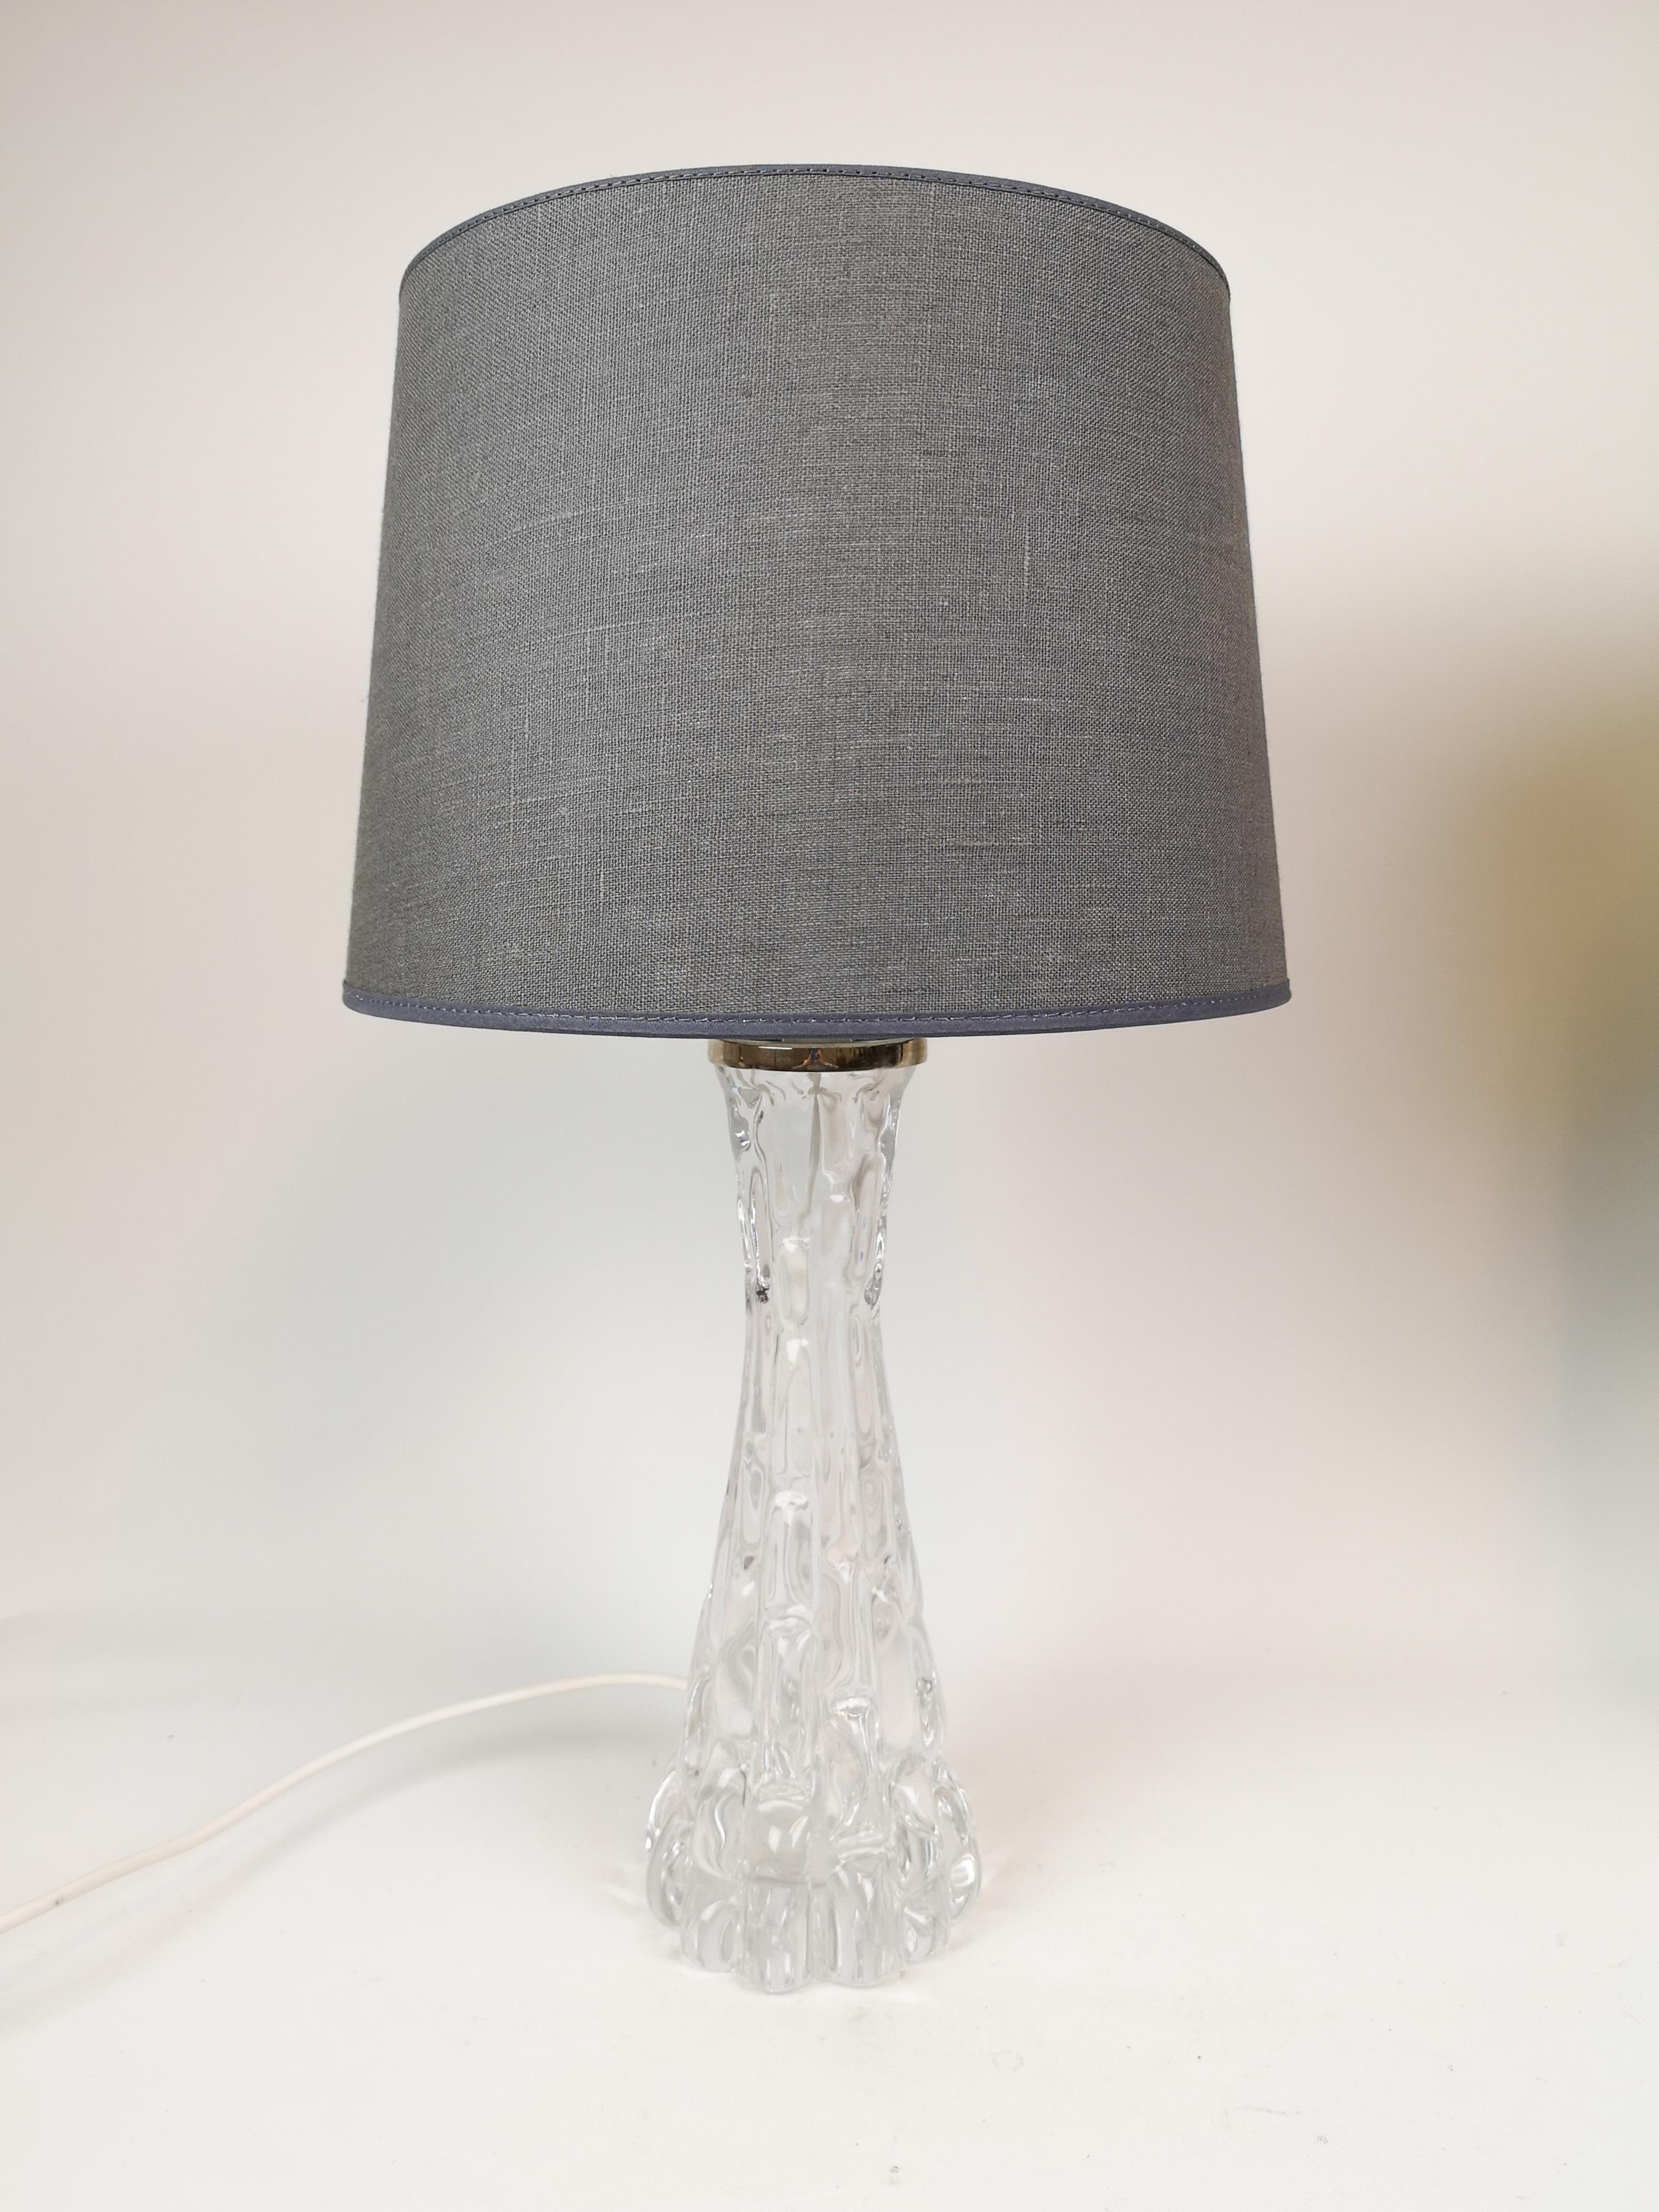 Swedish Midcentury Crystal Table Lamps Orrefors by Carl Fagerlund In Good Condition For Sale In Hillringsberg, SE